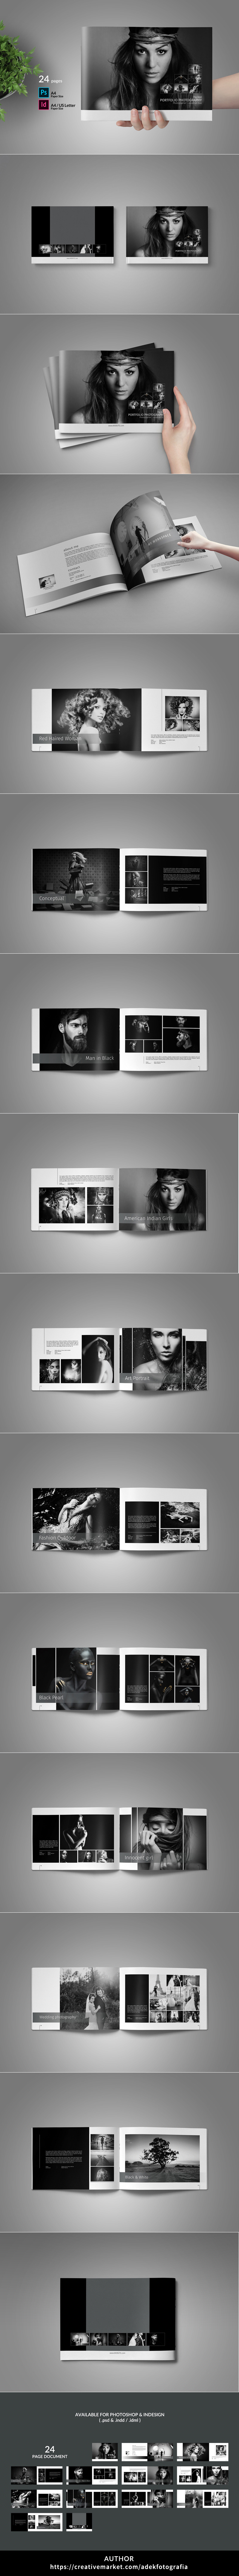 psd template indesign template photographyportfolio template photo album template Photography  portfolio a4 us letter simple minimalist